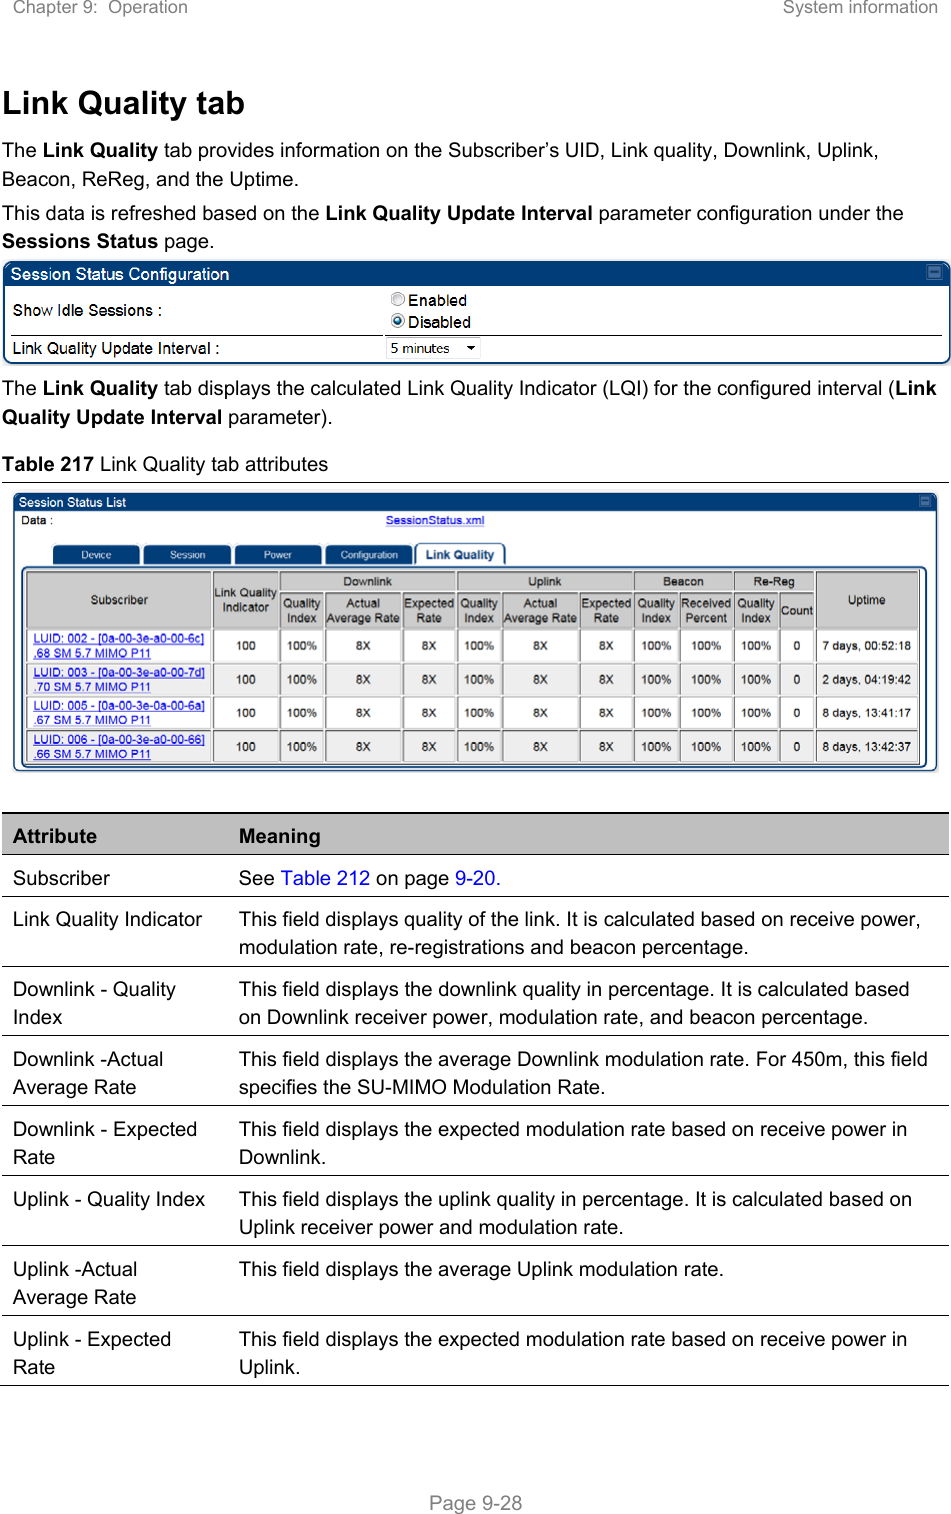 Chapter 9:  Operation  System information   Page 9-28 Link Quality tab The Link Quality tab provides information on the Subscriber’s UID, Link quality, Downlink, Uplink, Beacon, ReReg, and the Uptime. This data is refreshed based on the Link Quality Update Interval parameter configuration under the Sessions Status page.   The Link Quality tab displays the calculated Link Quality Indicator (LQI) for the configured interval (Link Quality Update Interval parameter). Table 217 Link Quality tab attributes   Attribute  Meaning Subscriber  See Table 212 on page 9-20. Link Quality Indicator  This field displays quality of the link. It is calculated based on receive power, modulation rate, re-registrations and beacon percentage. Downlink - Quality Index This field displays the downlink quality in percentage. It is calculated based on Downlink receiver power, modulation rate, and beacon percentage. Downlink -Actual Average Rate This field displays the average Downlink modulation rate. For 450m, this field specifies the SU-MIMO Modulation Rate. Downlink - Expected Rate This field displays the expected modulation rate based on receive power in Downlink. Uplink - Quality Index  This field displays the uplink quality in percentage. It is calculated based on Uplink receiver power and modulation rate. Uplink -Actual Average Rate This field displays the average Uplink modulation rate. Uplink - Expected Rate This field displays the expected modulation rate based on receive power in Uplink. 